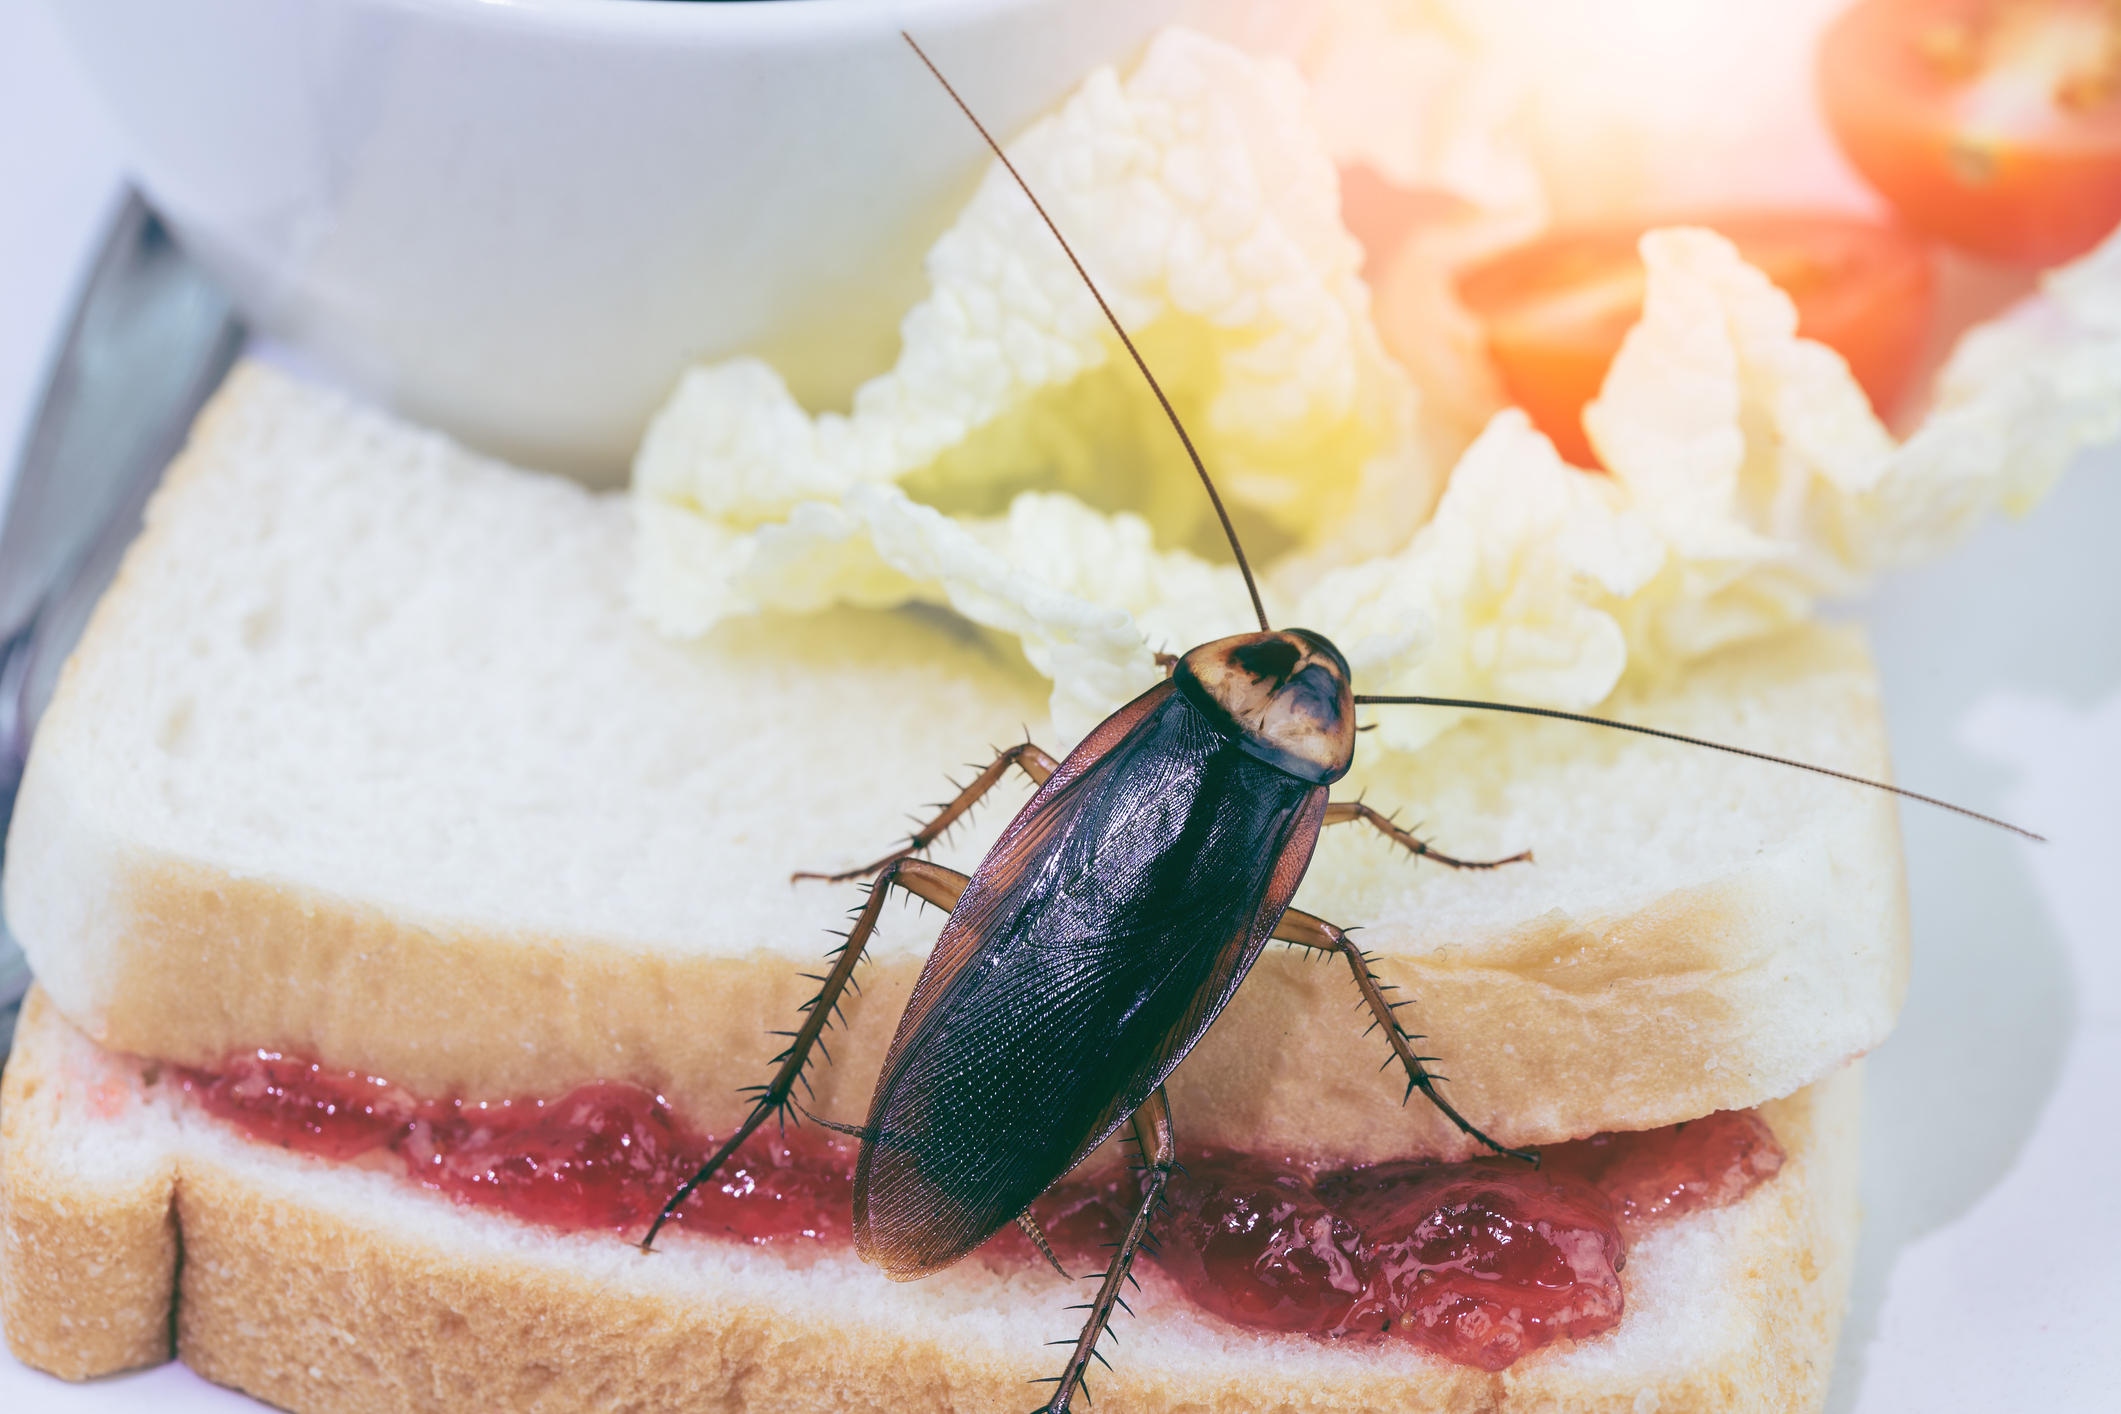 Cockroach on food is never good